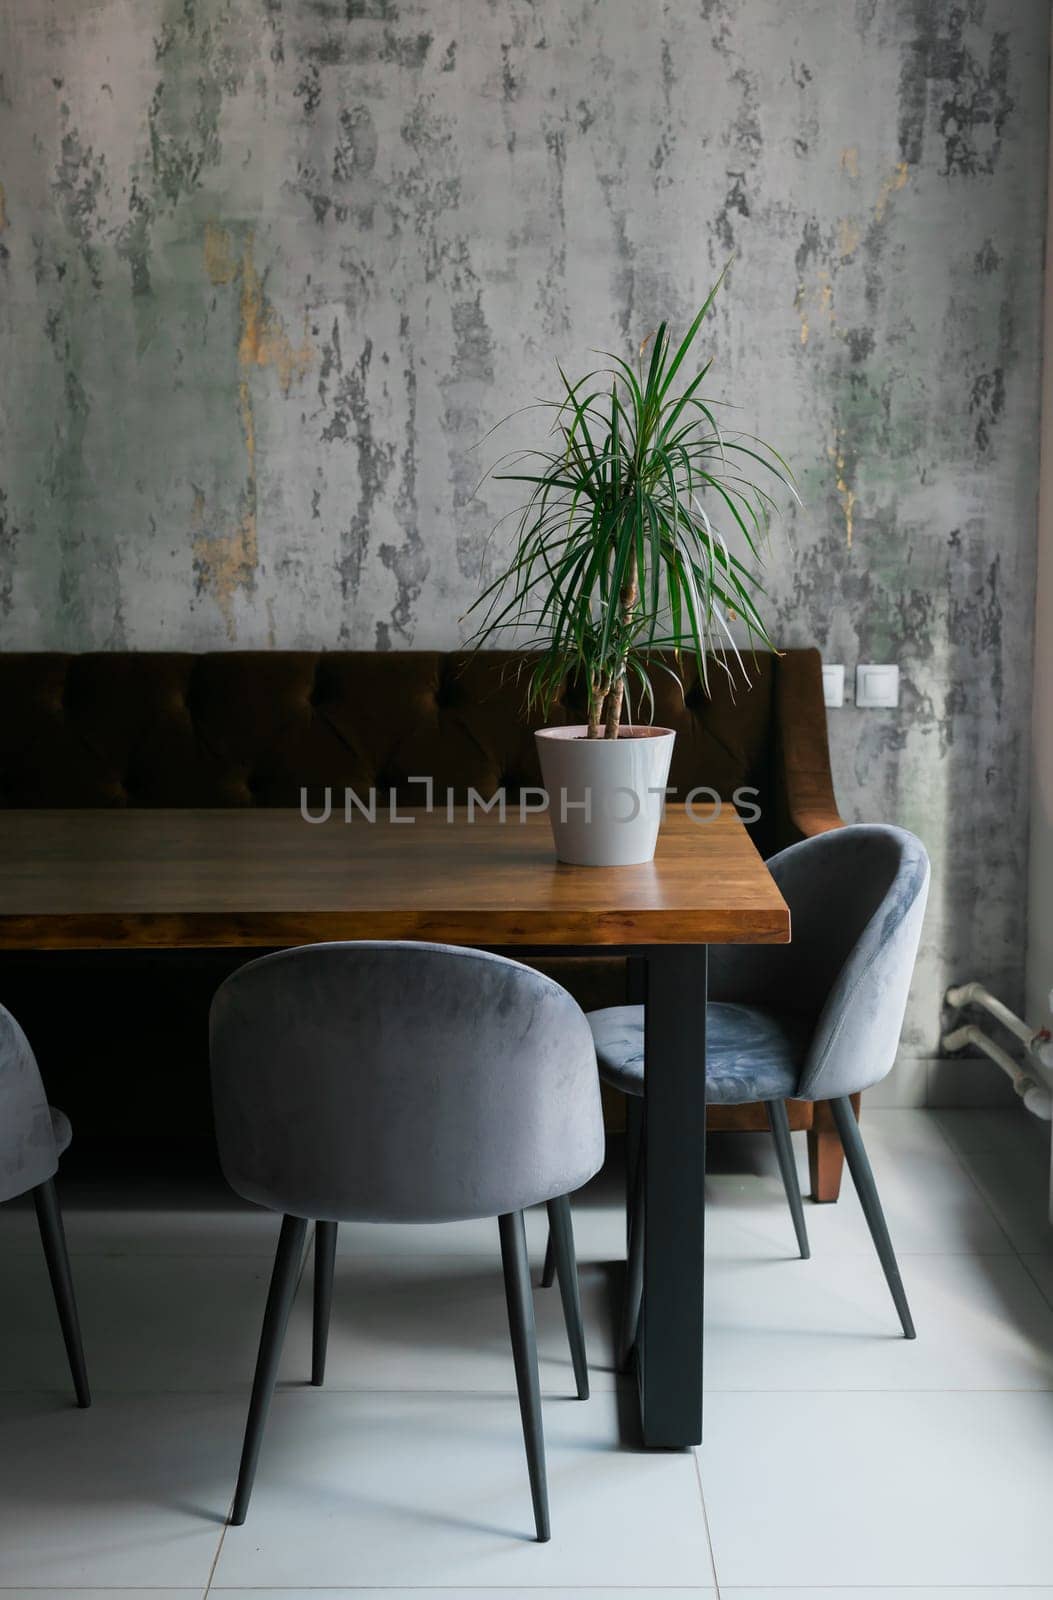 Grey chairs at wooden table in minimalist in cafe interior with poster and window